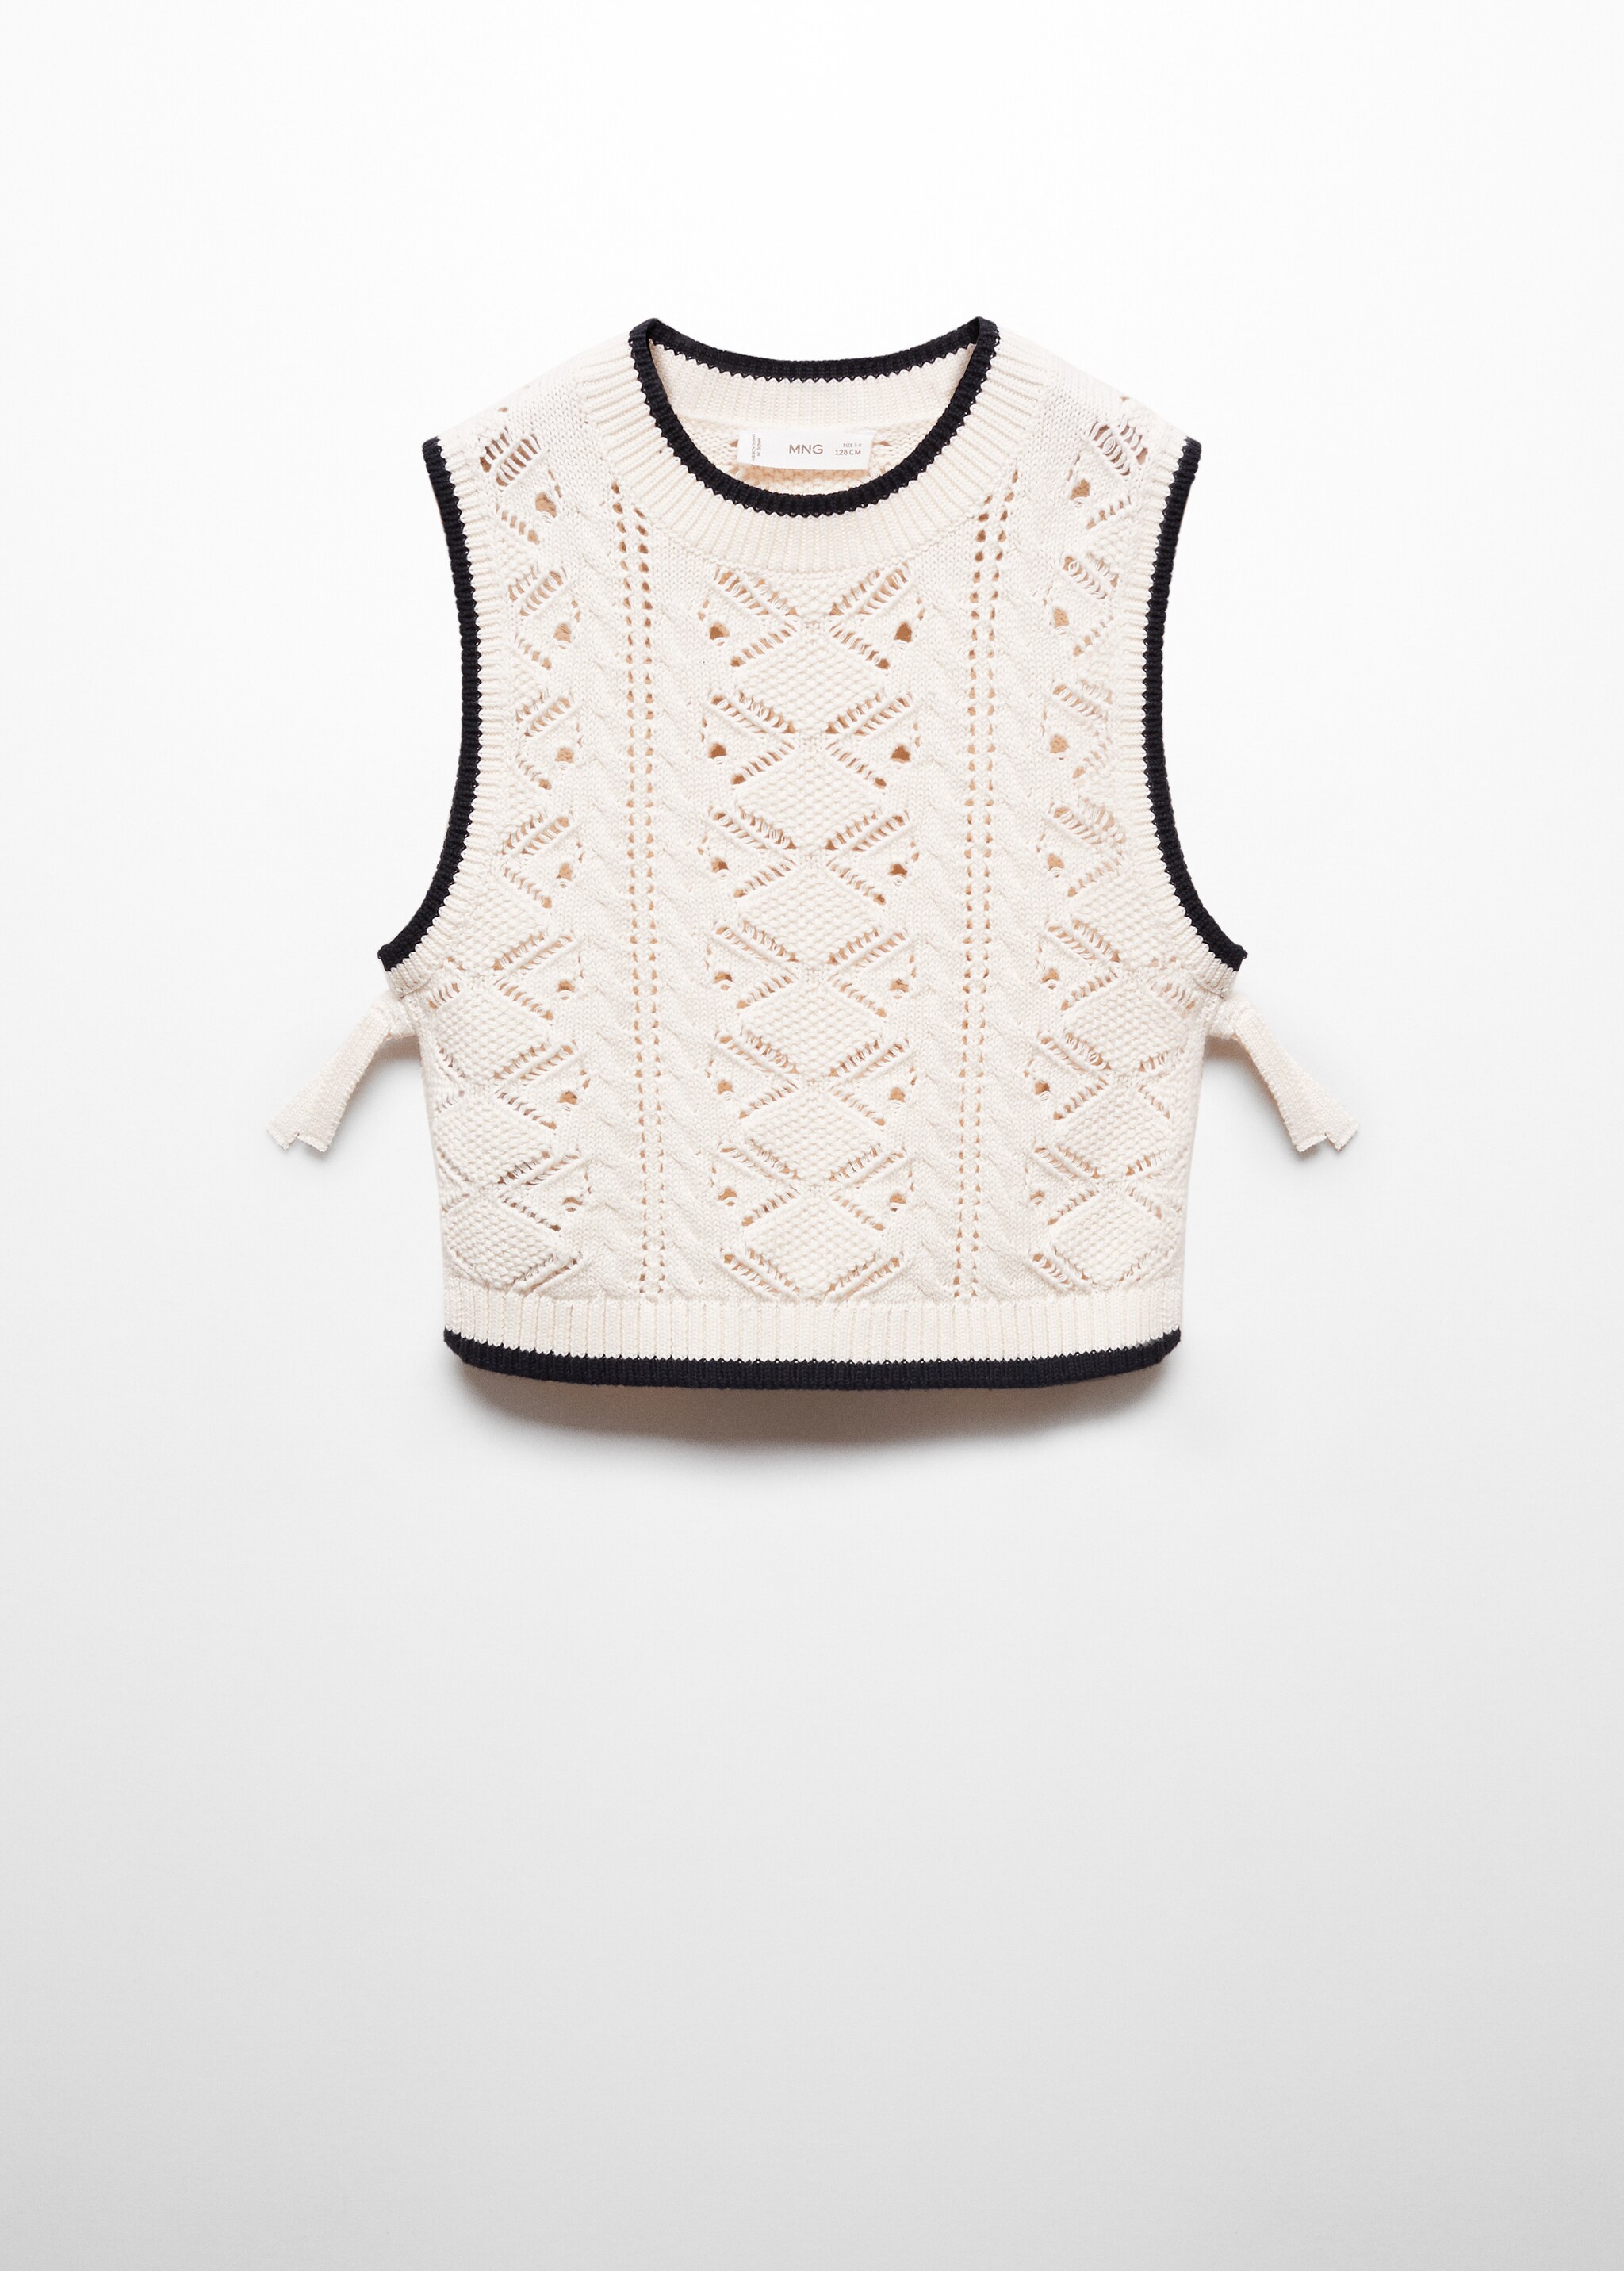 Openwork cotton vest - Article without model